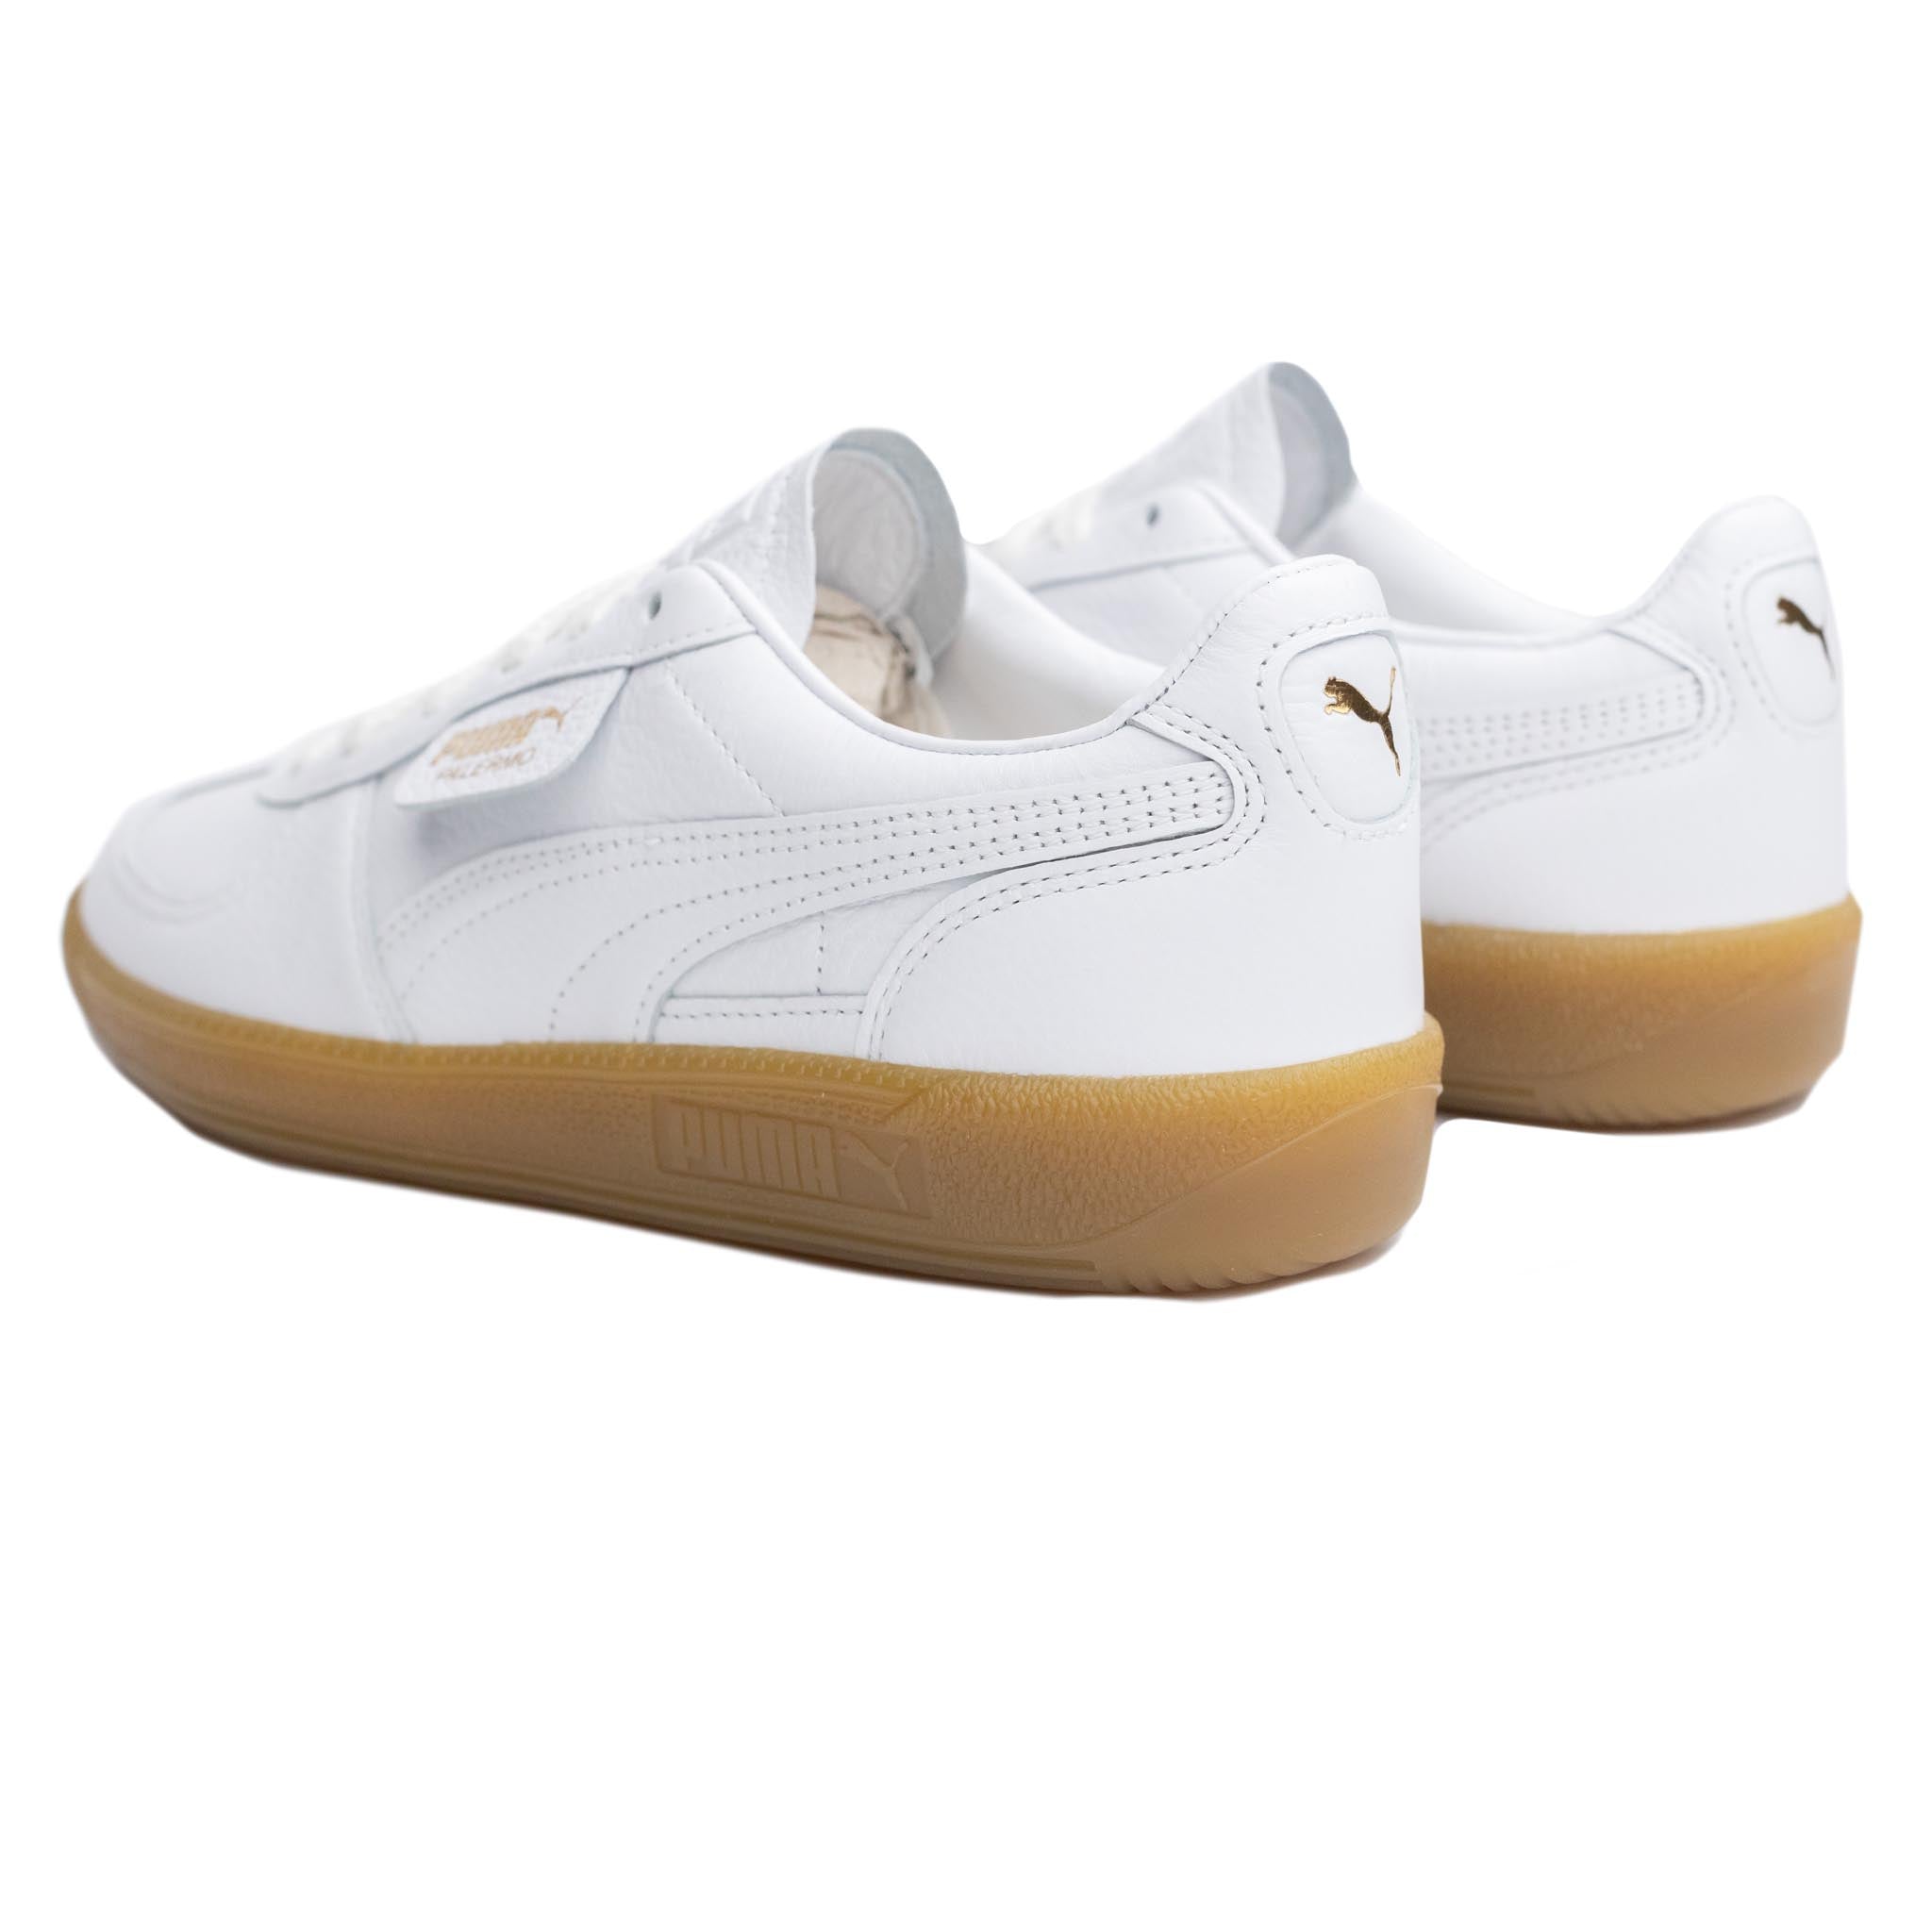 Puma Palermo Premium White/Frosted Ivory